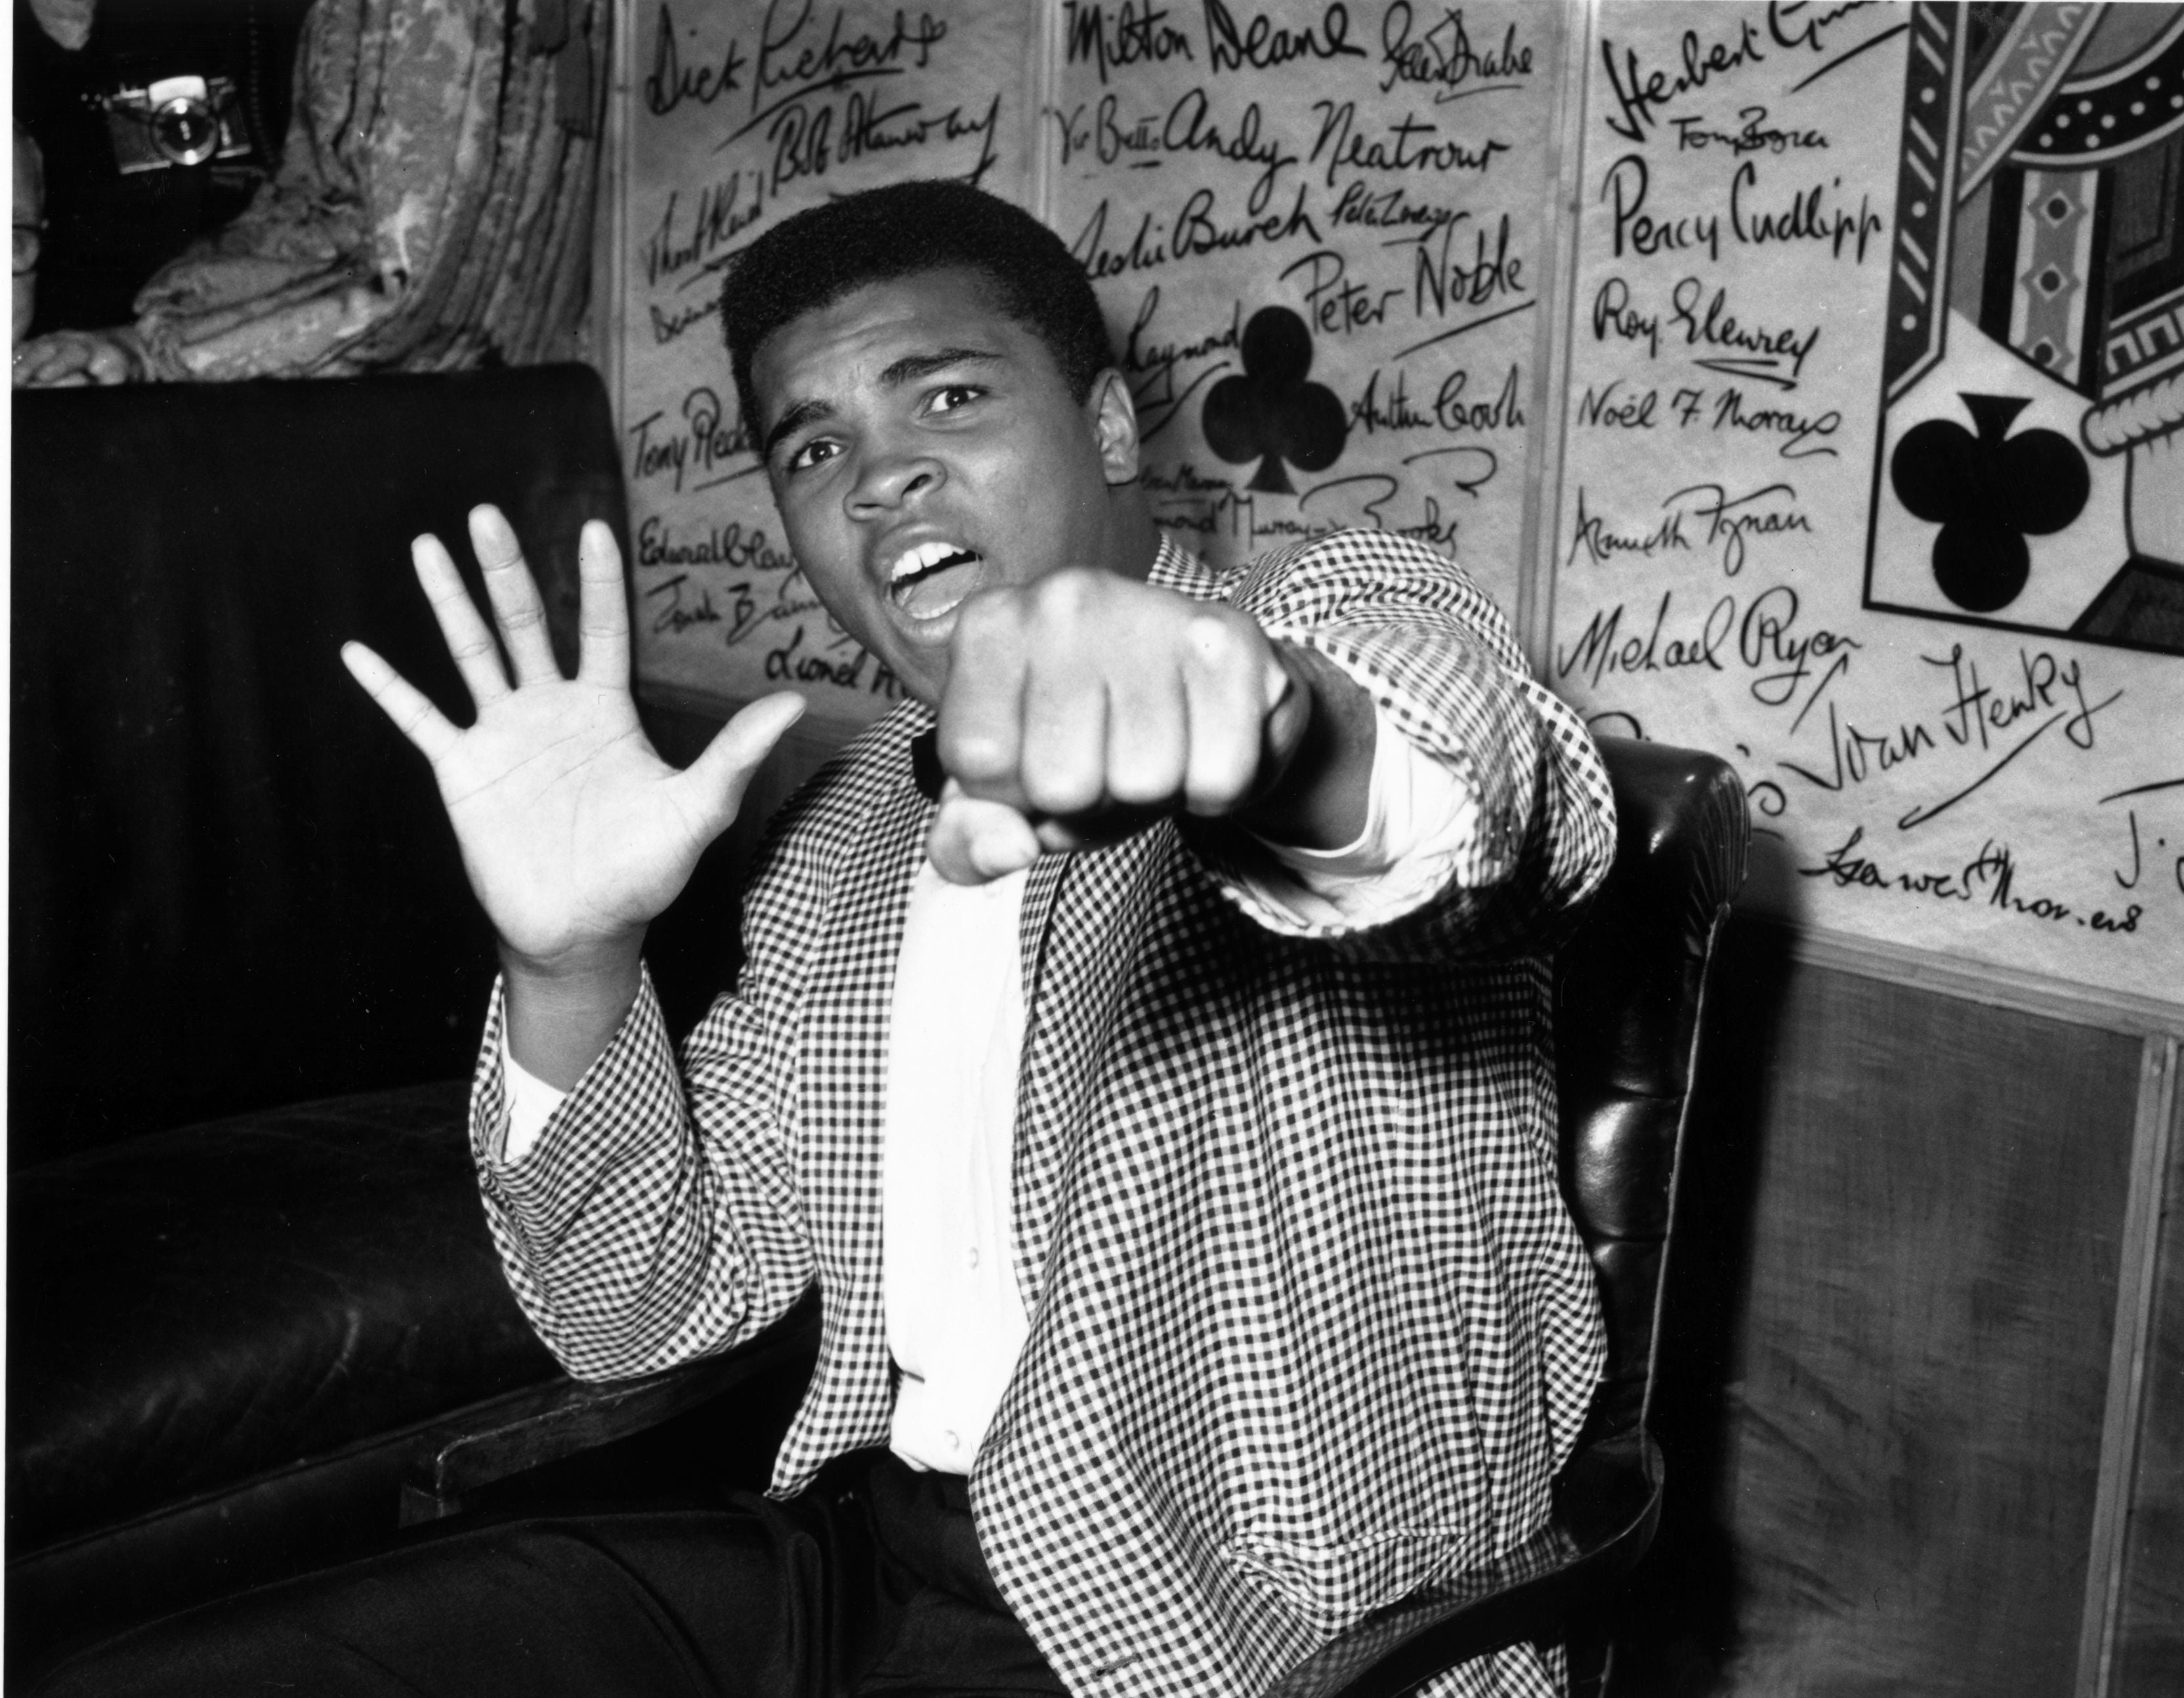 Muhammad Ali would have turned 80 years old on 17 January 2022